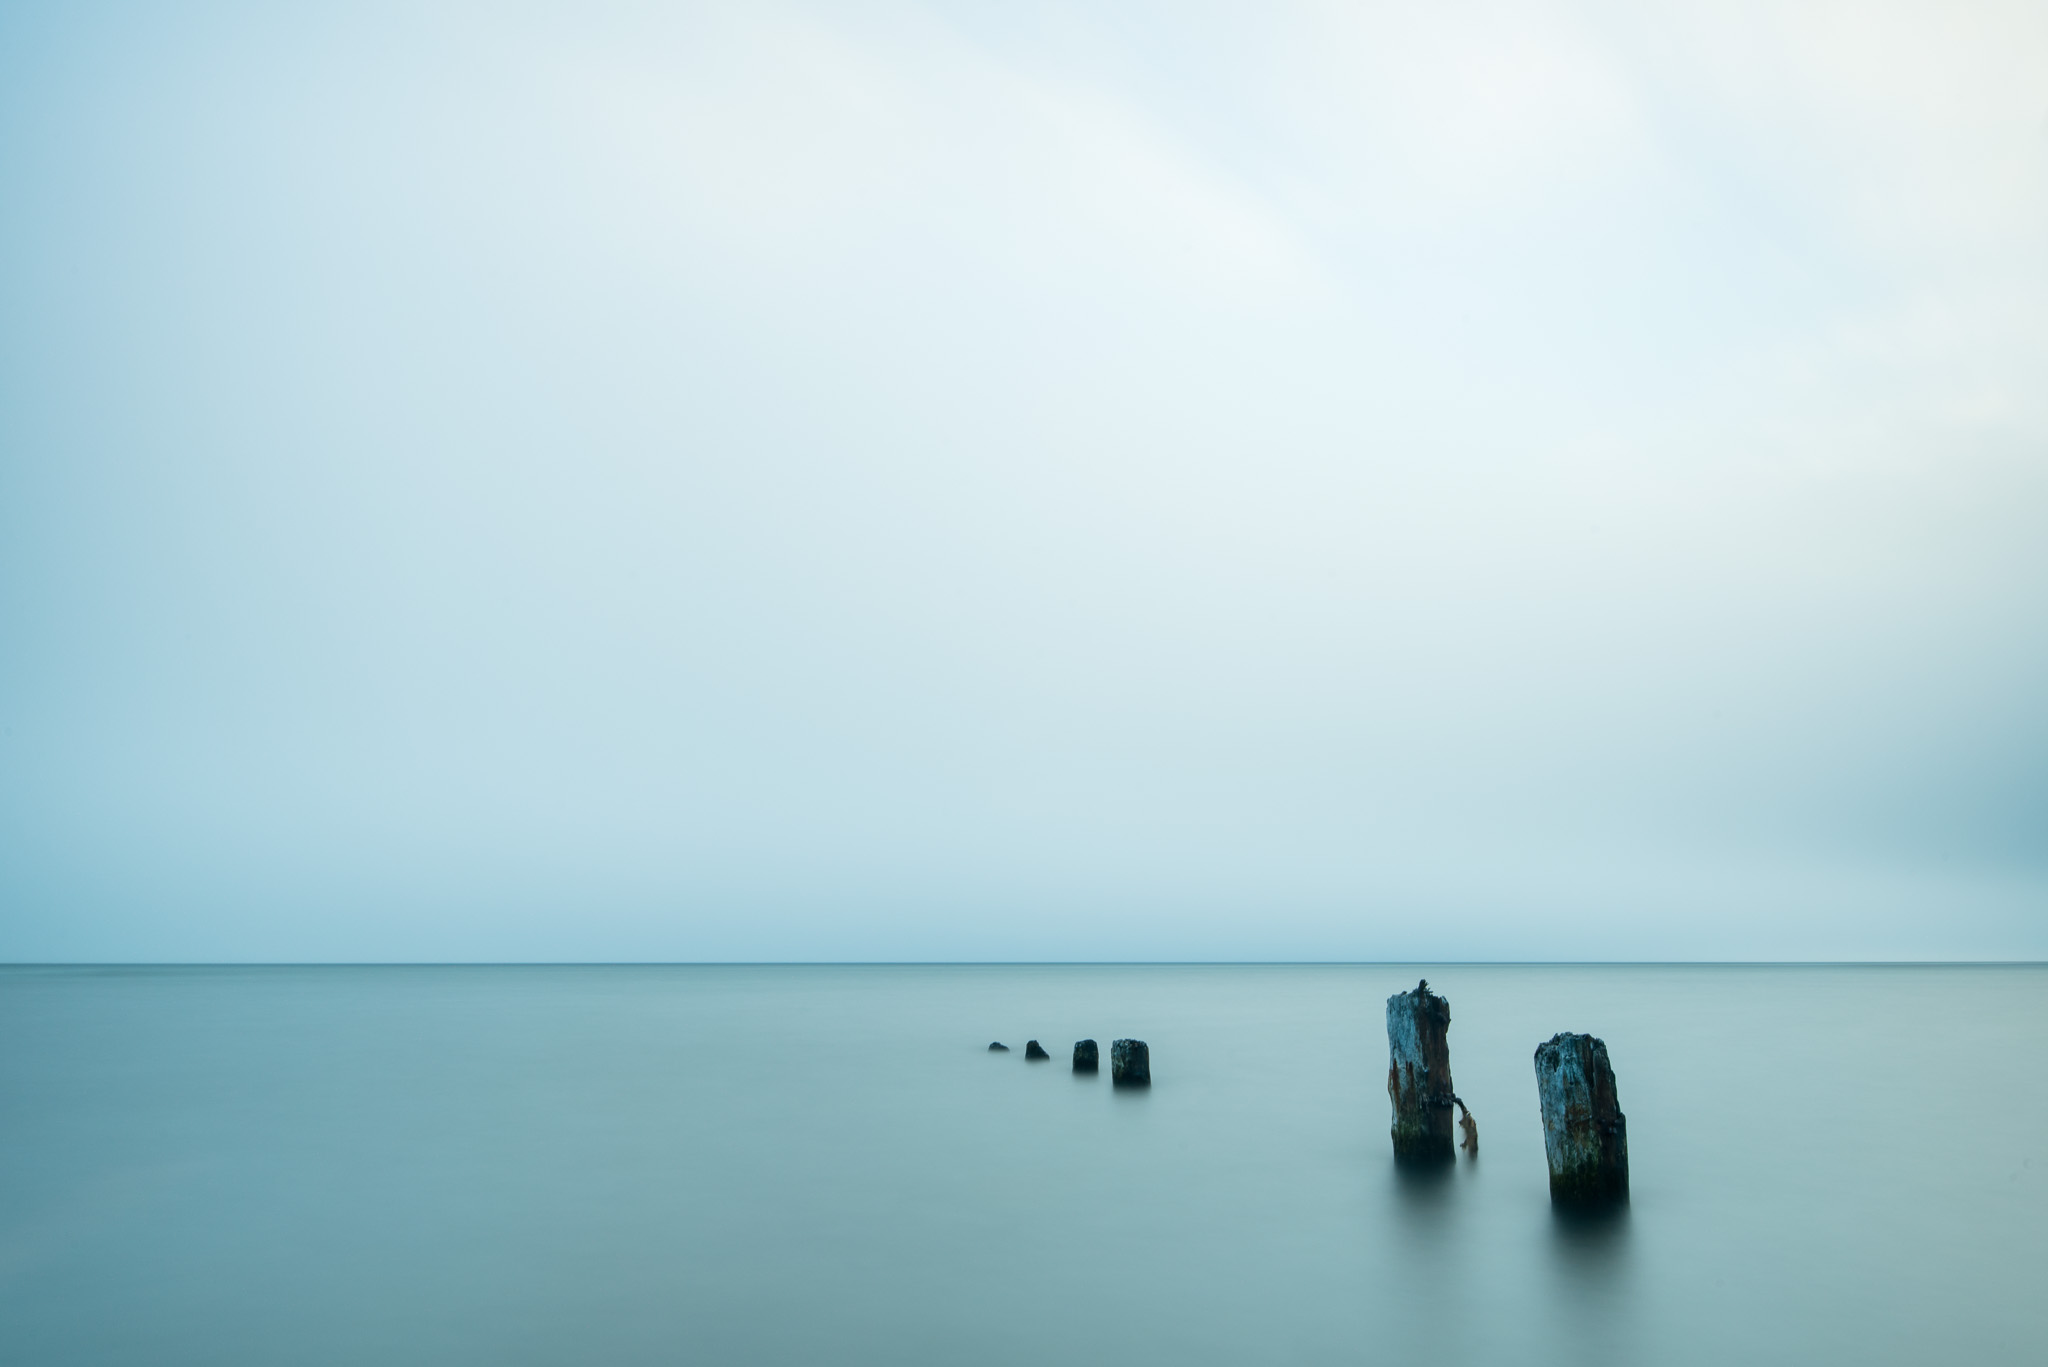  After the fog came in we left Sheringham Point and headed to Jordan River where we photographed this row of pilings.&nbsp; The fog on the horizon actually made for a great backdrop, creating an "infinity" effect where typically you can see the Olymp